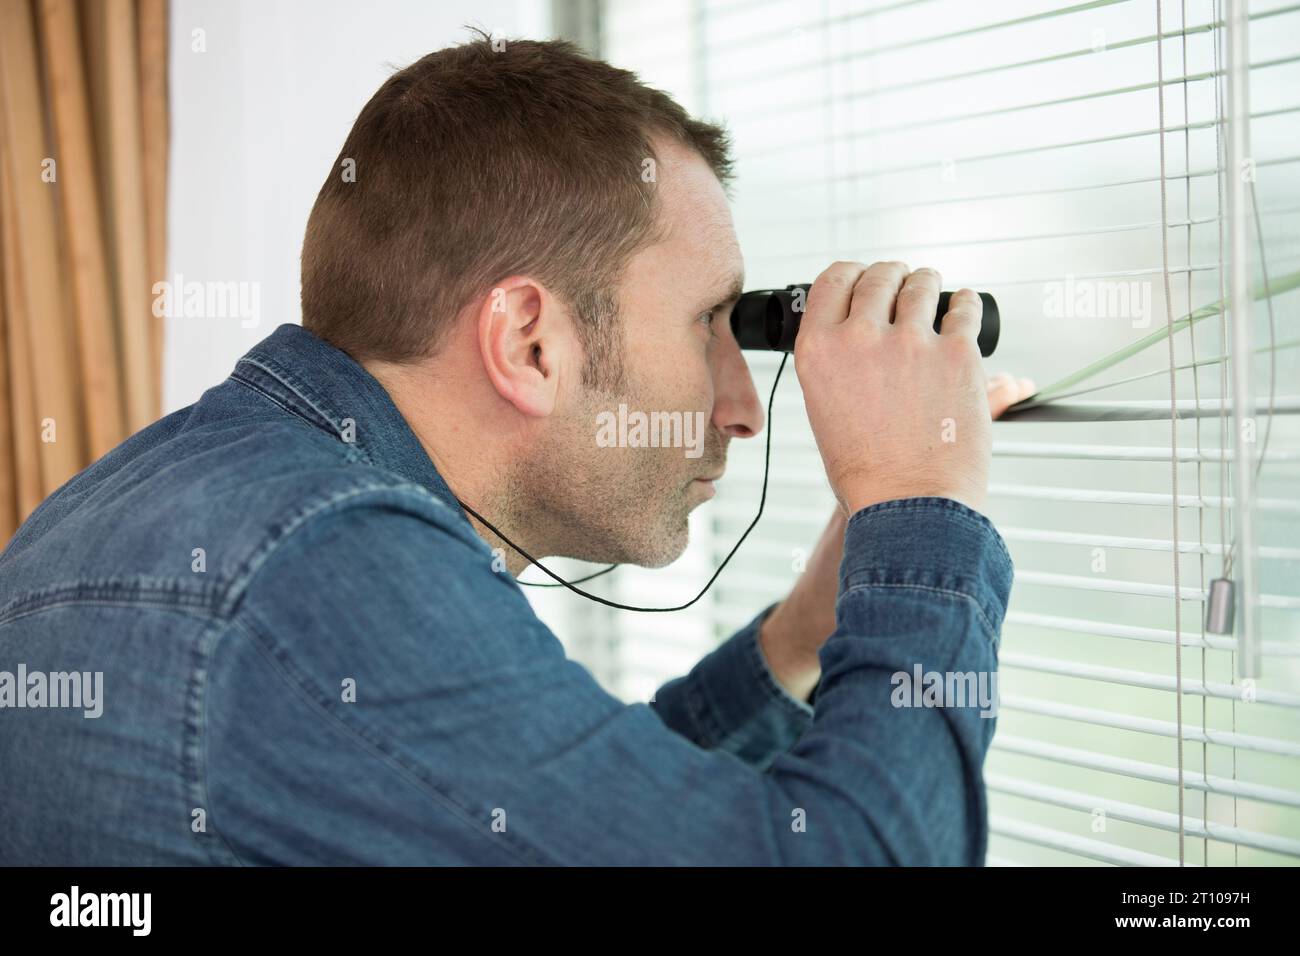 man watching out the window with binoculars Stock Photo